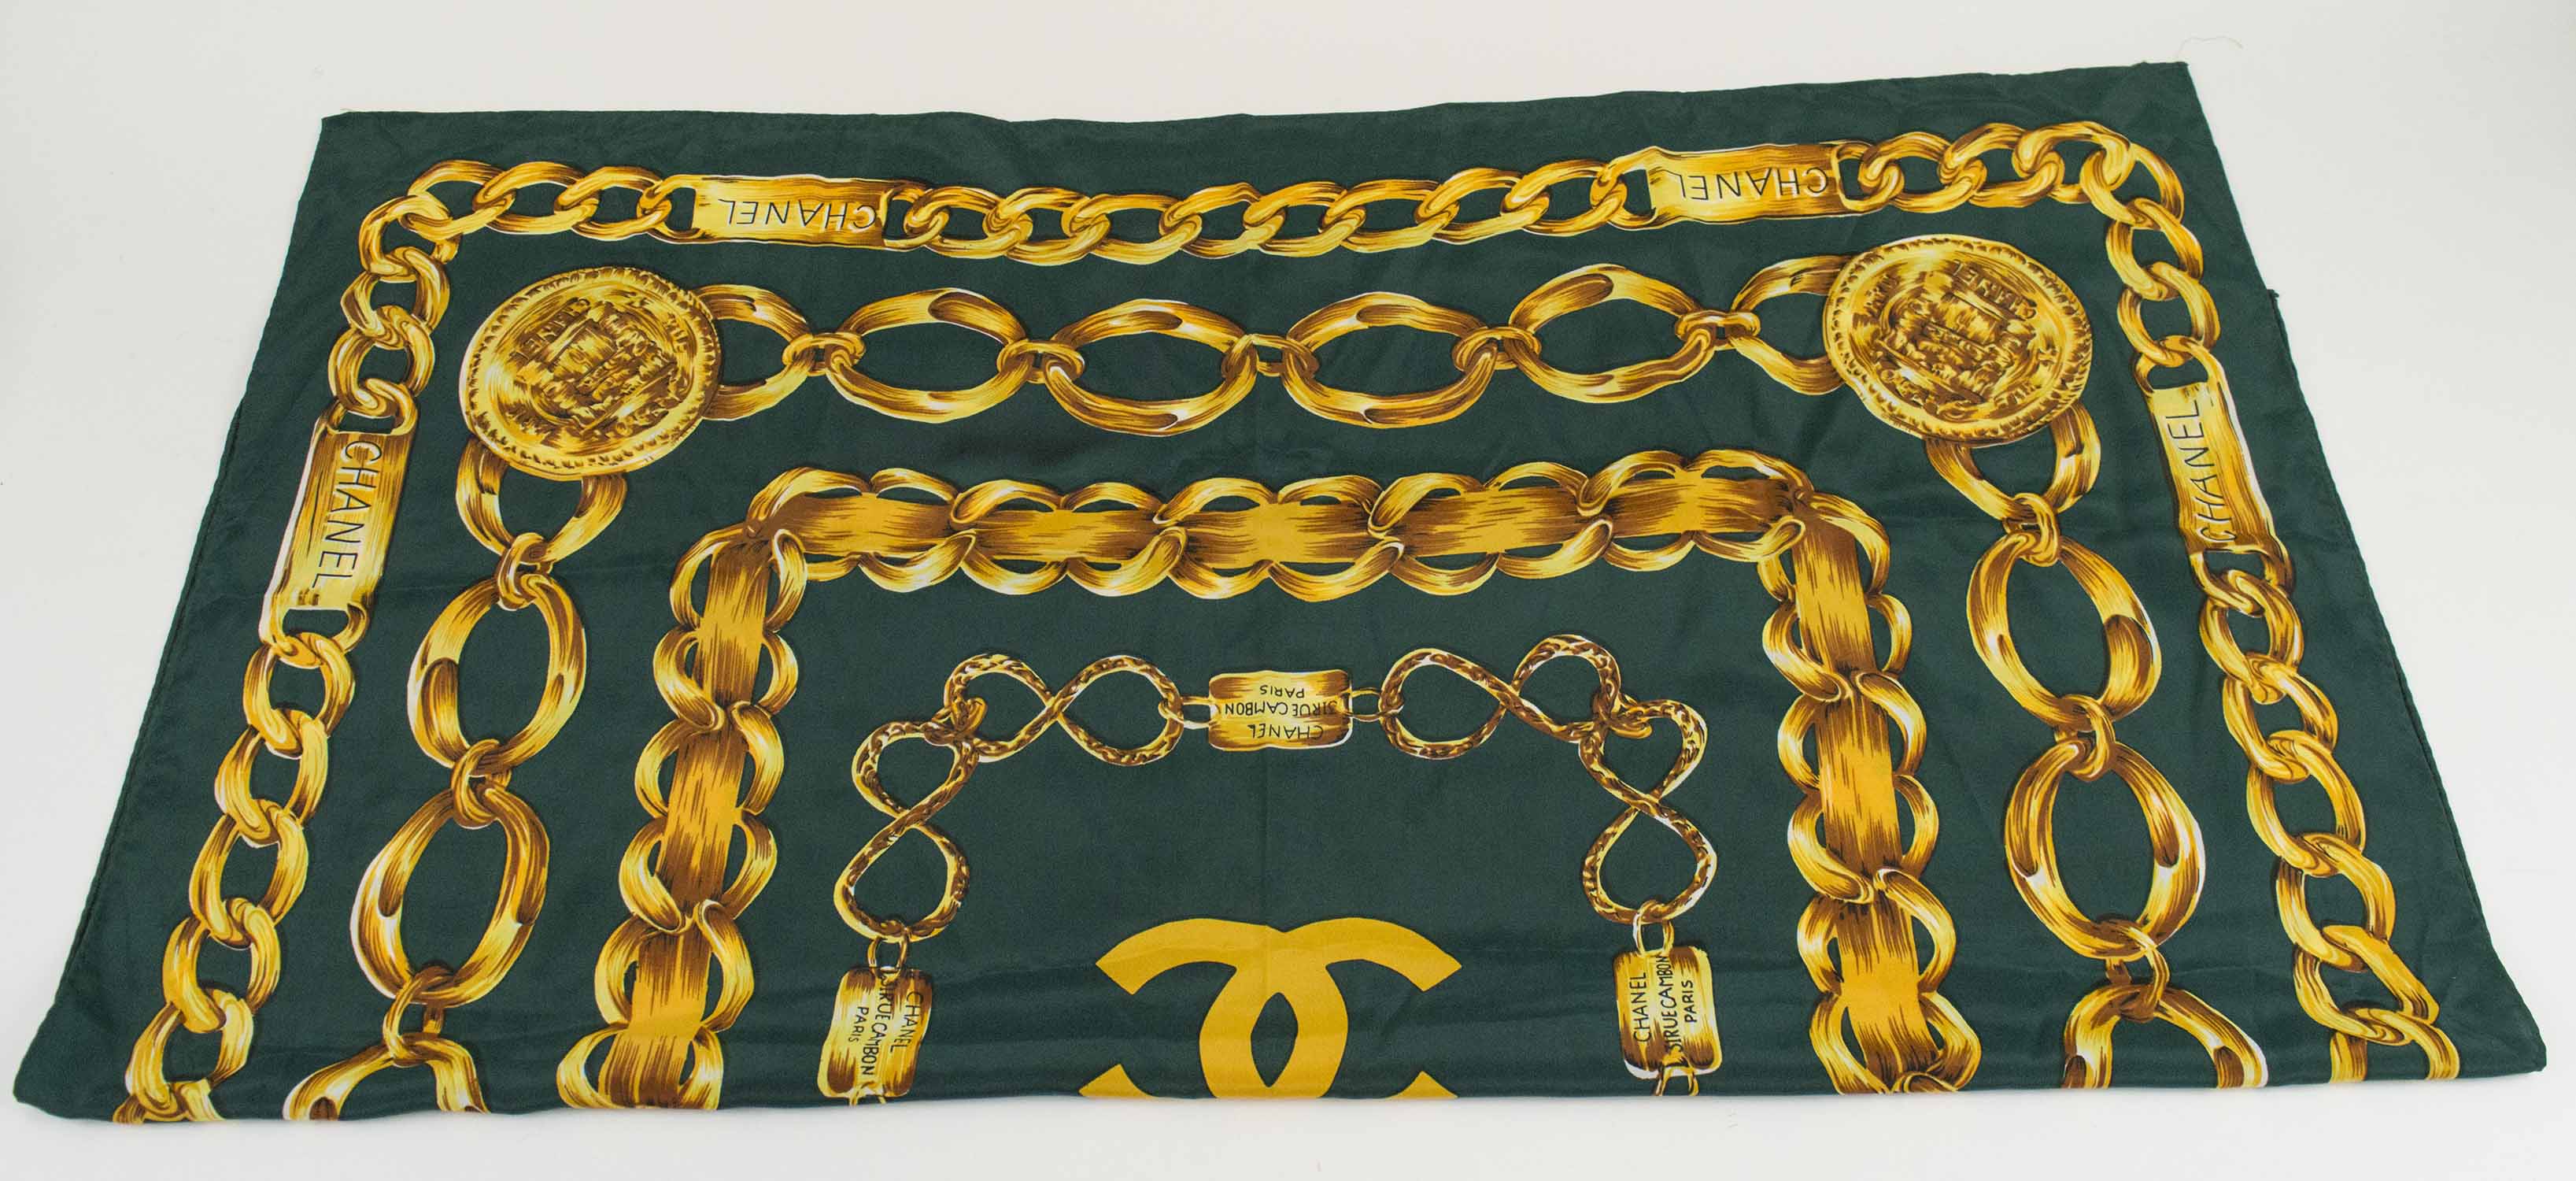 CHANEL RUE CAMBON VINTAGE SCARF, green with golden chain links